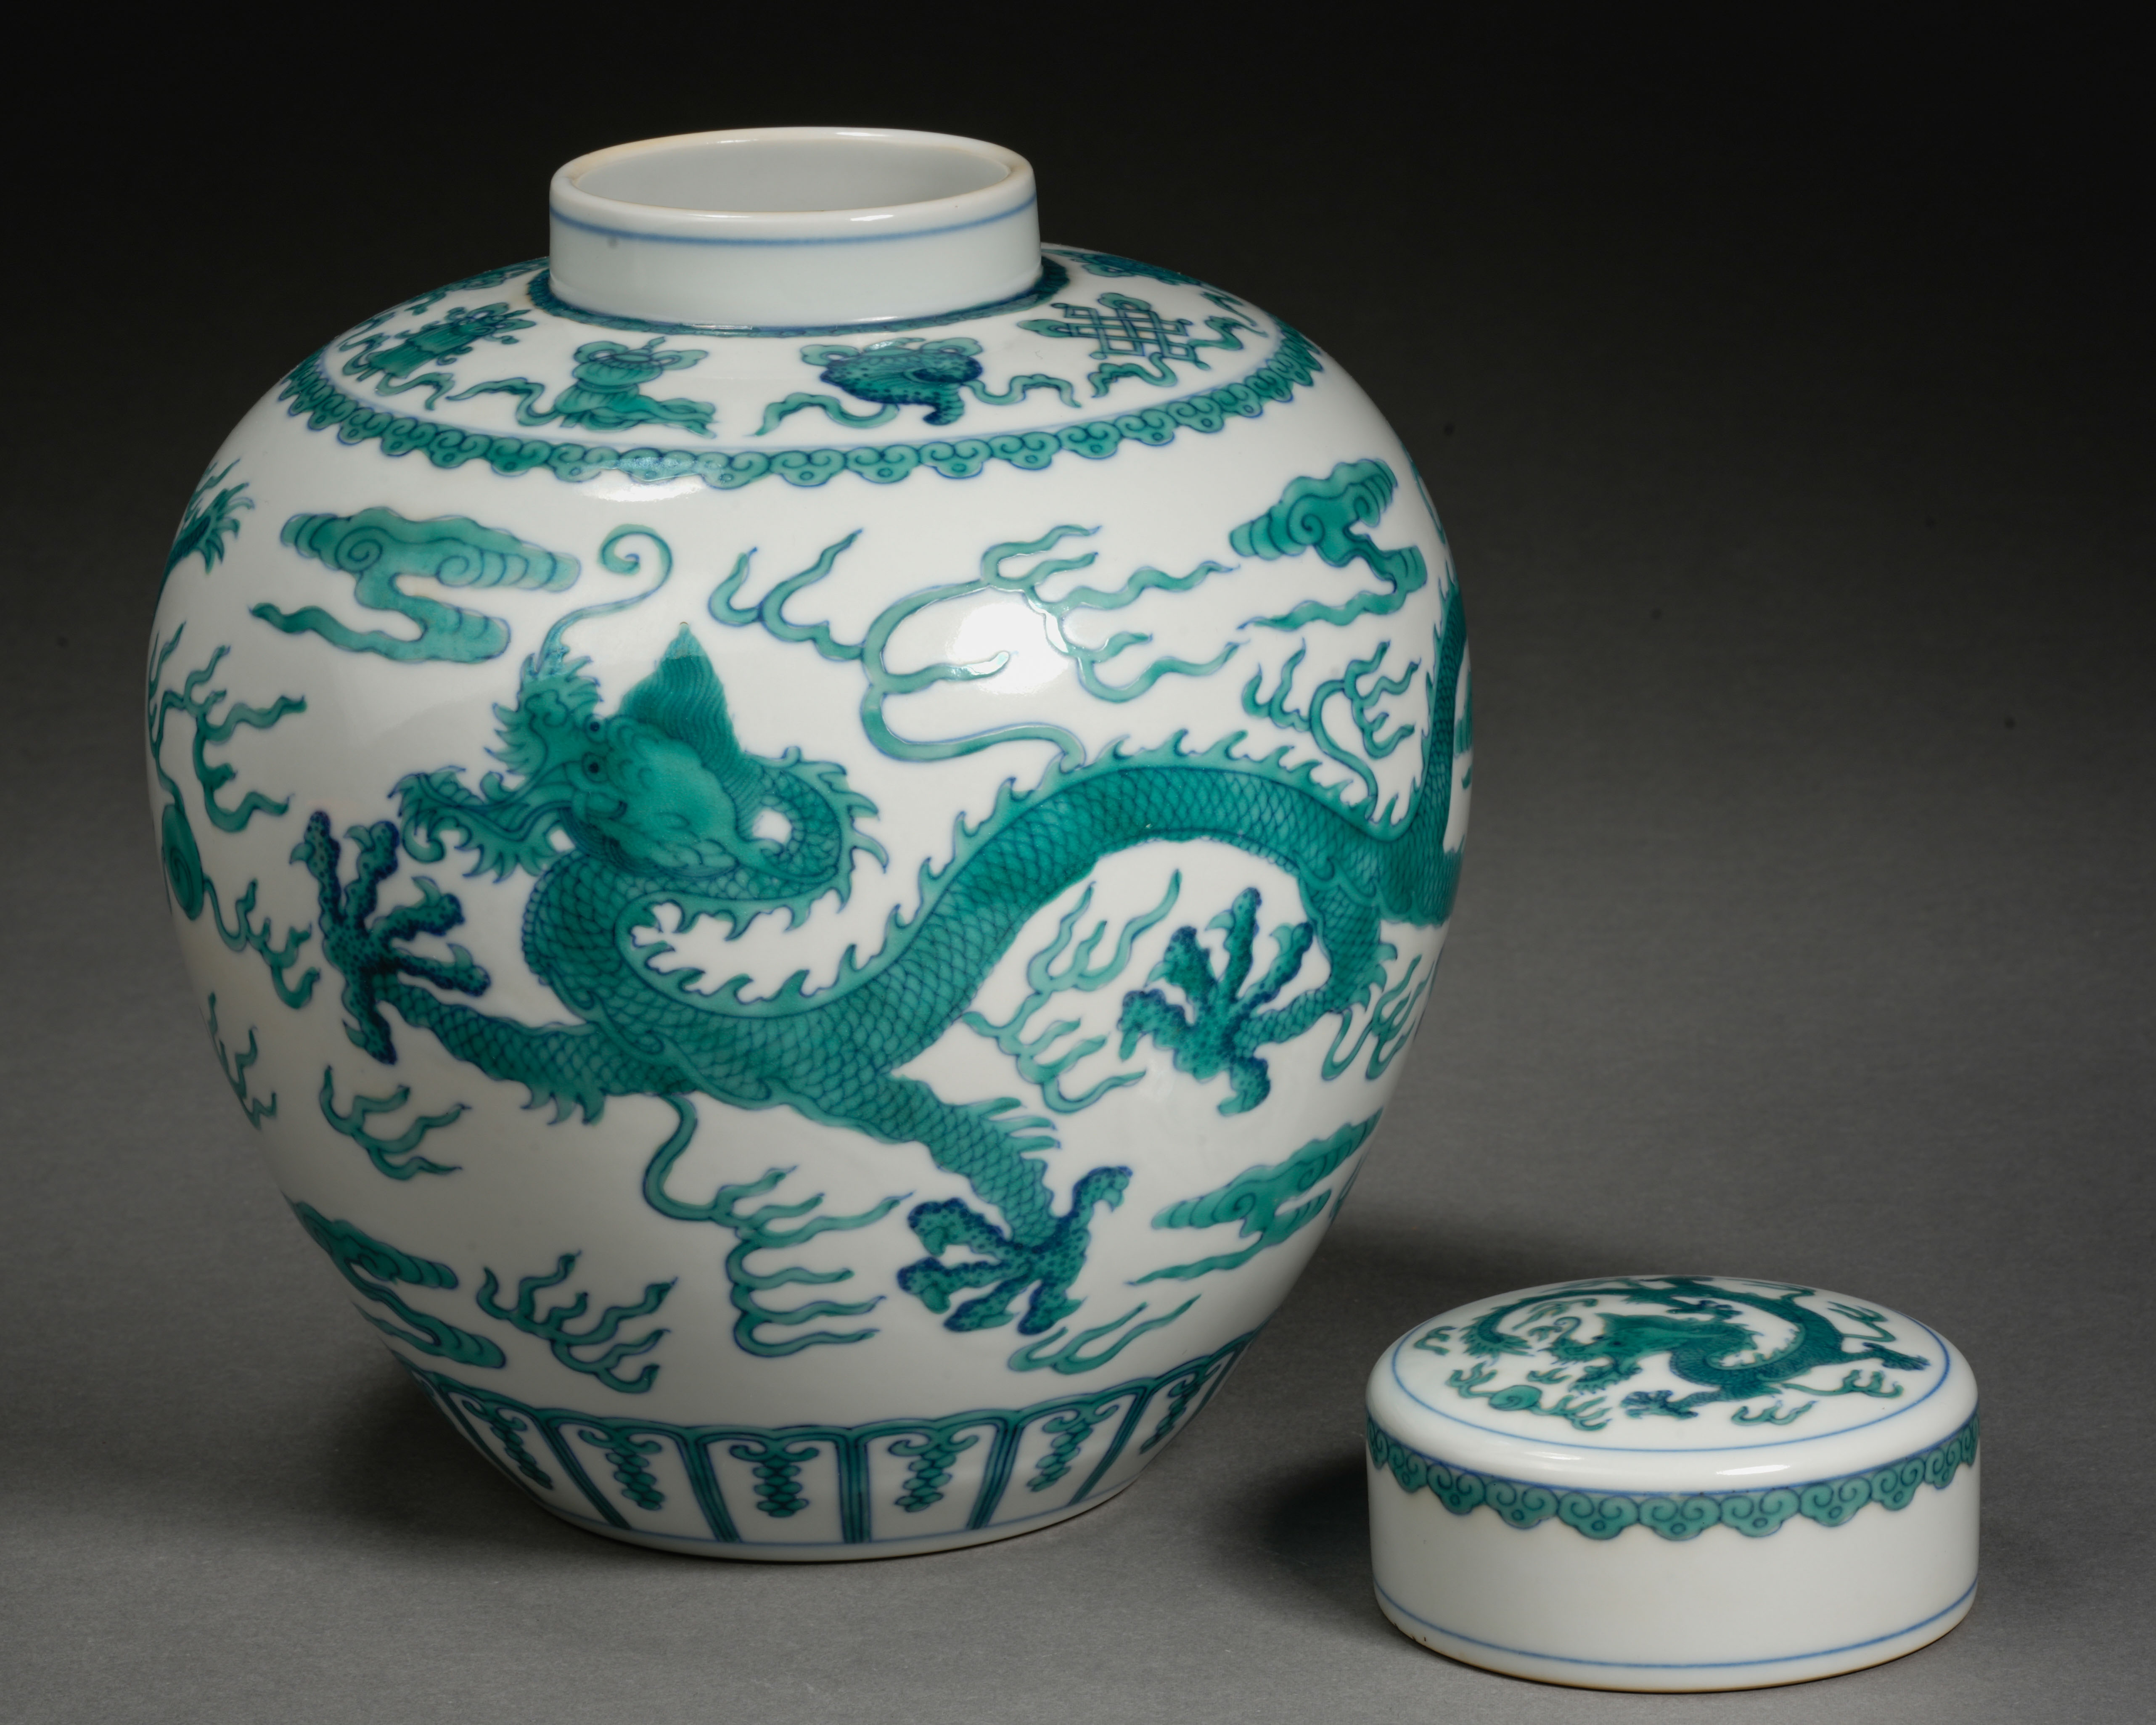 A Chinese Green Enameled Dragon Jar with Cover - Image 4 of 9